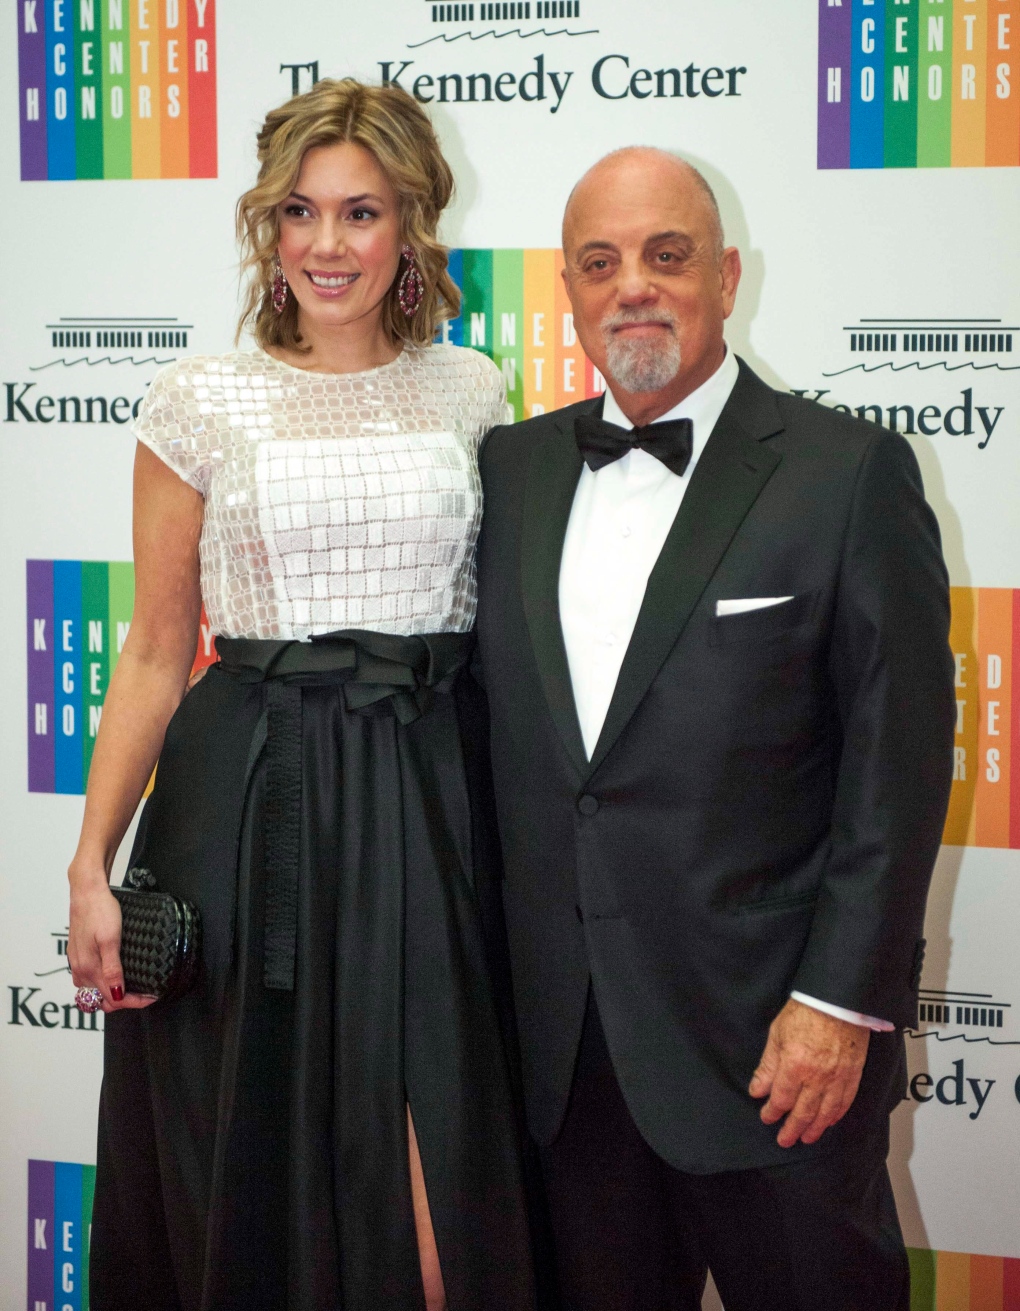 Billy Joel receives Kennedy Center Honors